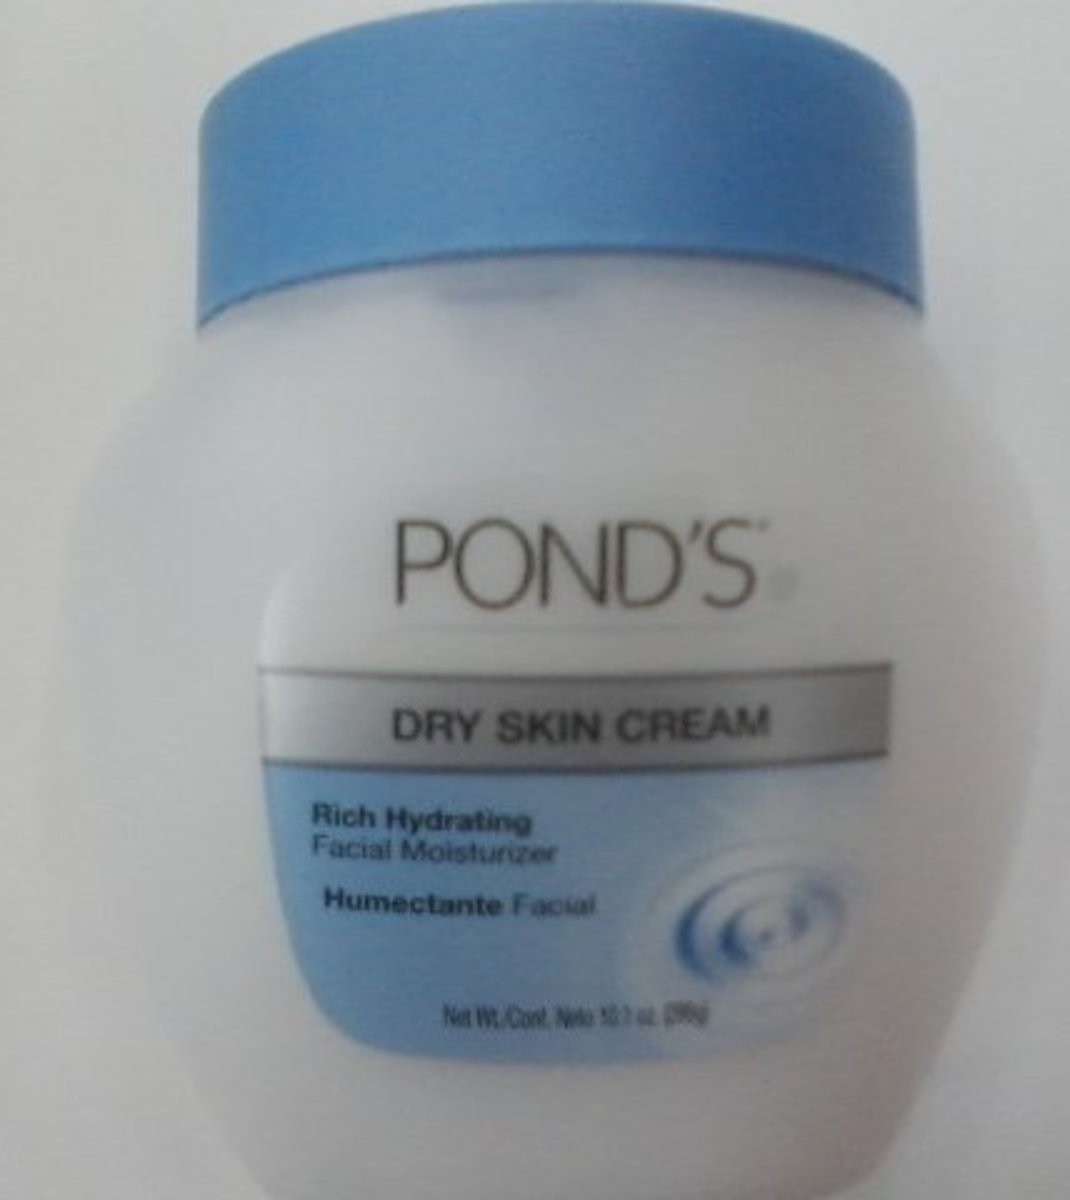 Pond's Cold Cream: The Best Moisturizer for Women and Men